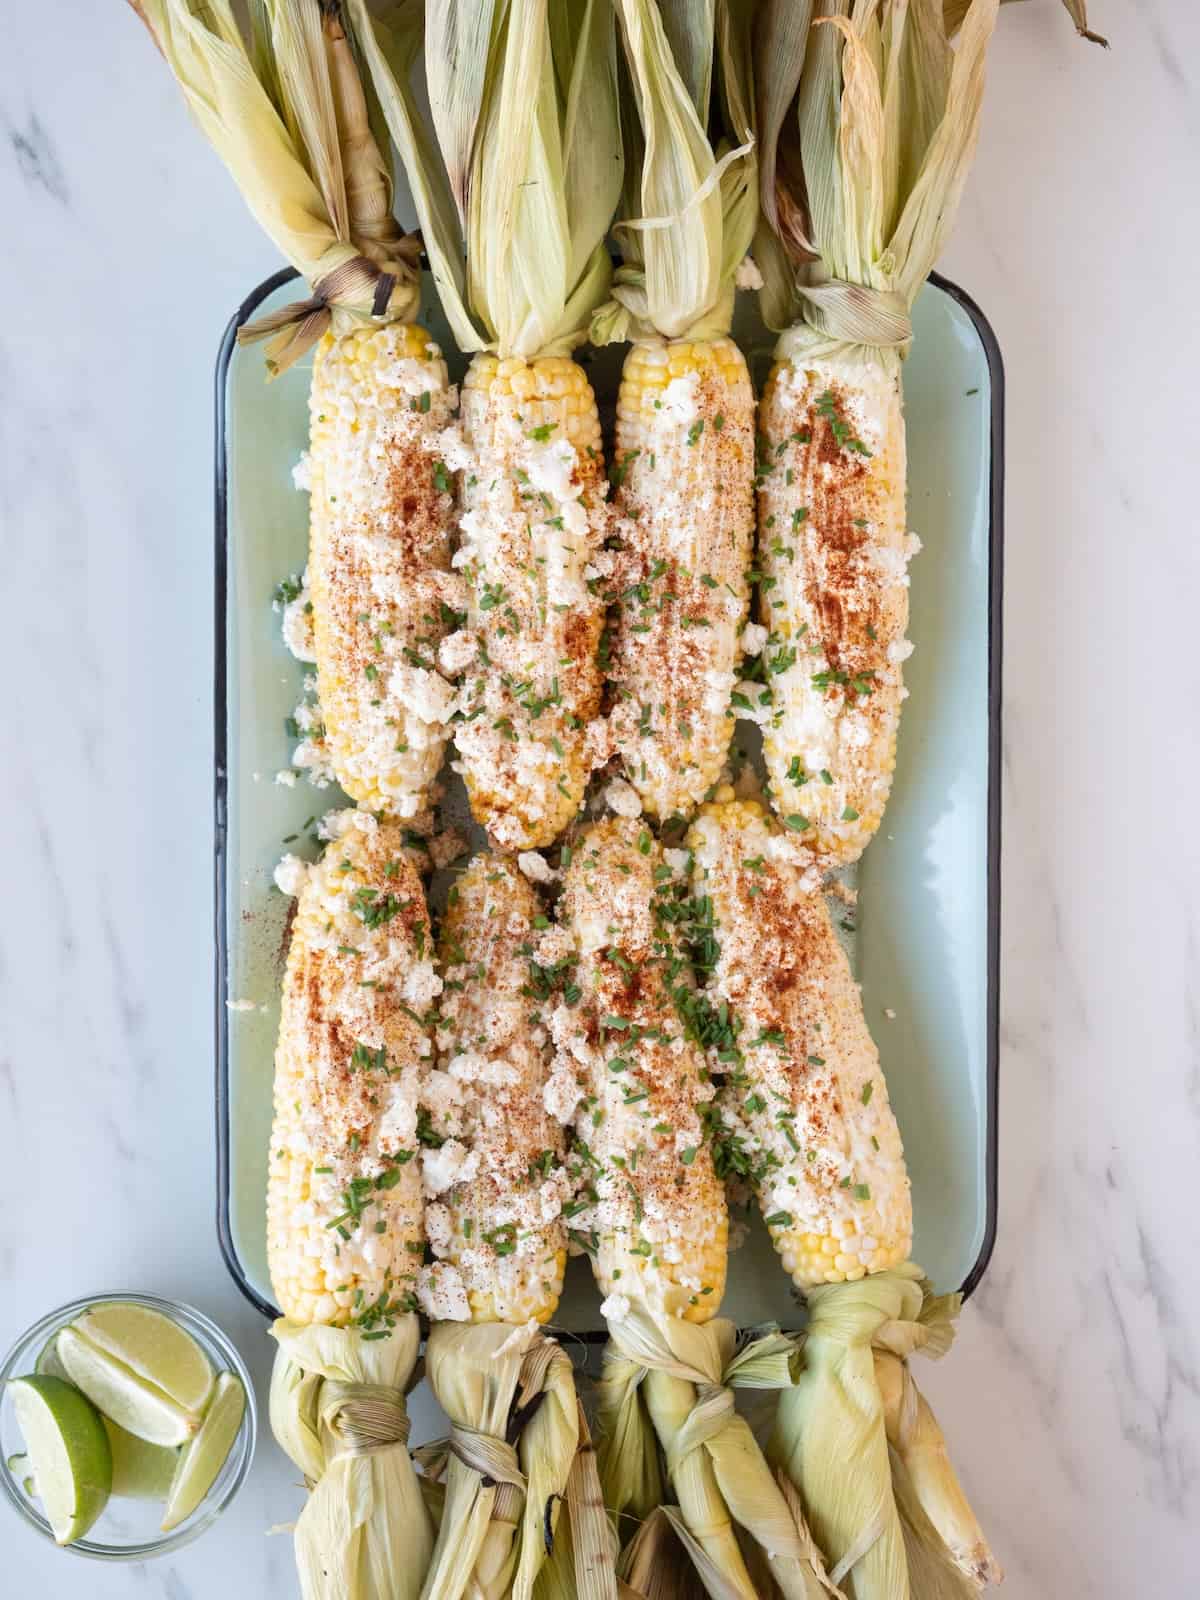 A blue and green rectangular platter with 8 corn on the cob placed with the husks pulled back but still attached, brushed with mayo and topped with chili pepper mixture, crumbled feta and chives, along with a small bowl of lime wedges on the side.